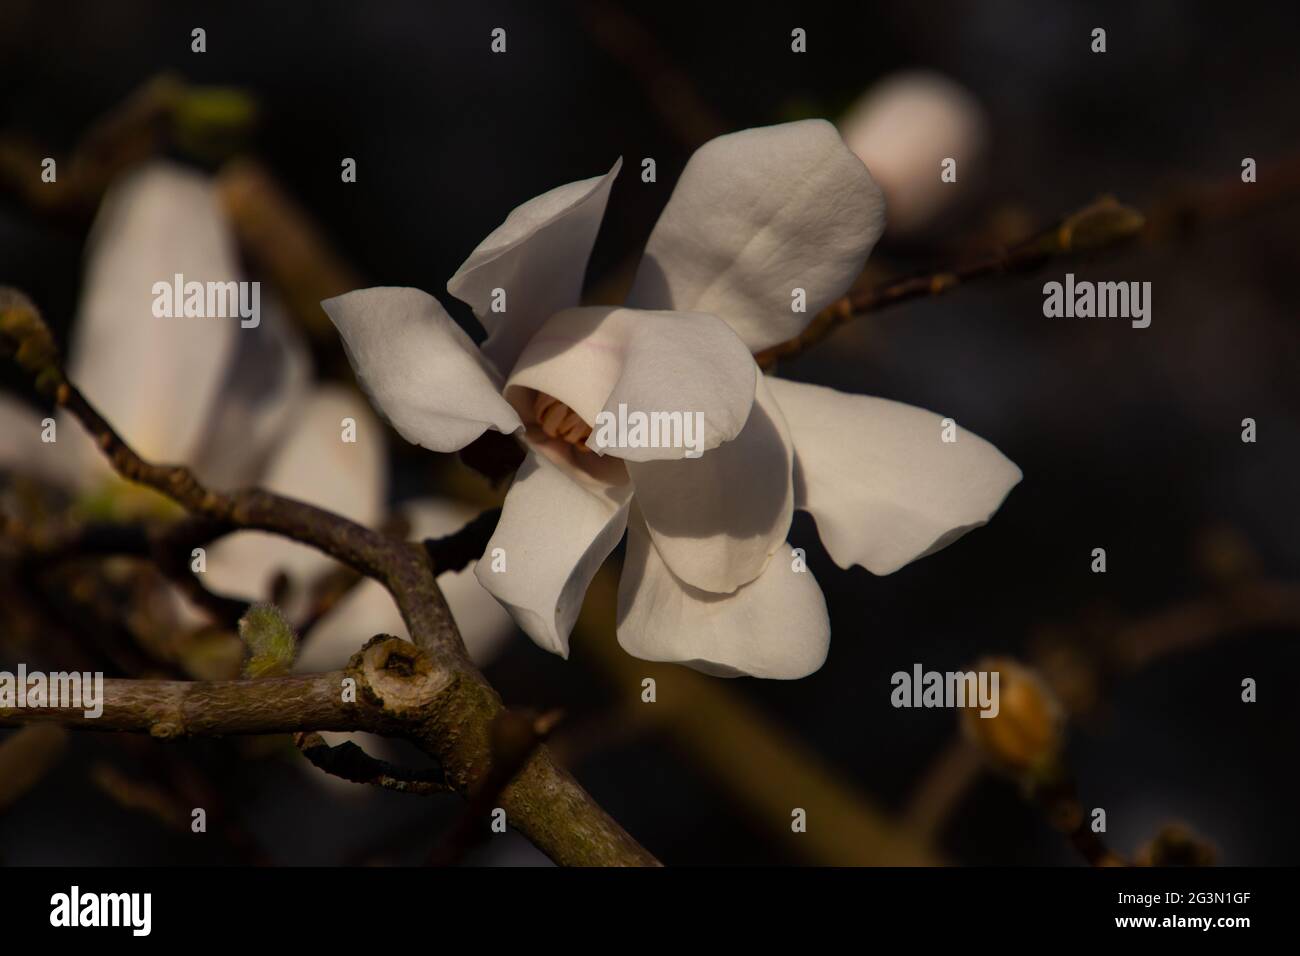 Branch with white blossoms of a Kobushi Magnolia, also called Magnolia kobus Stock Photo